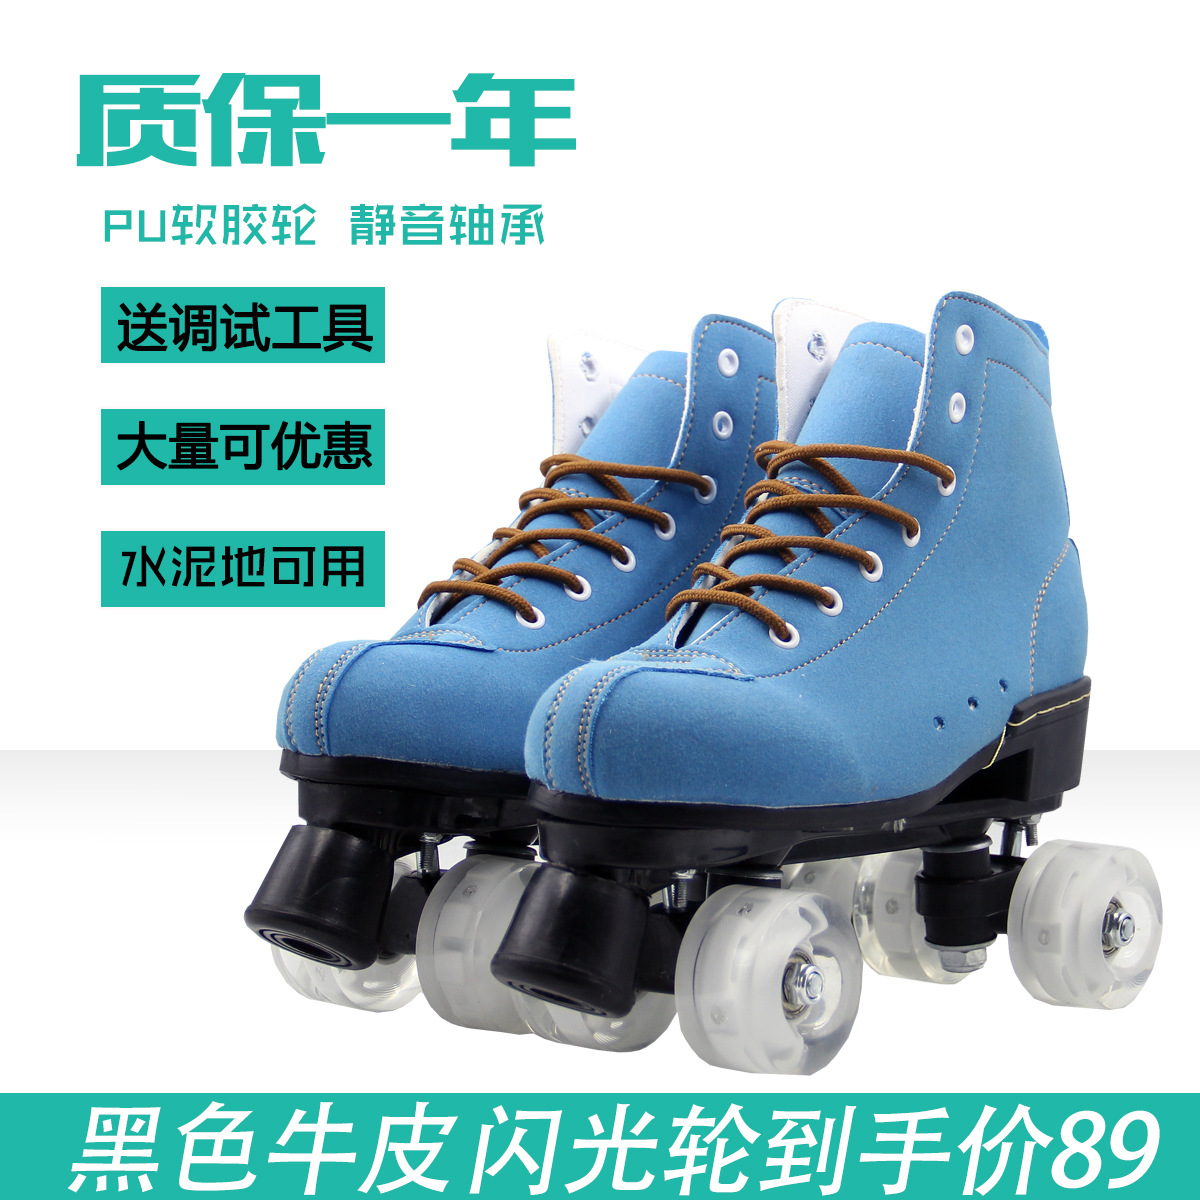 Adult row PU slide skates in adult men and women shoes roller skates four-wheel double row skates for adults